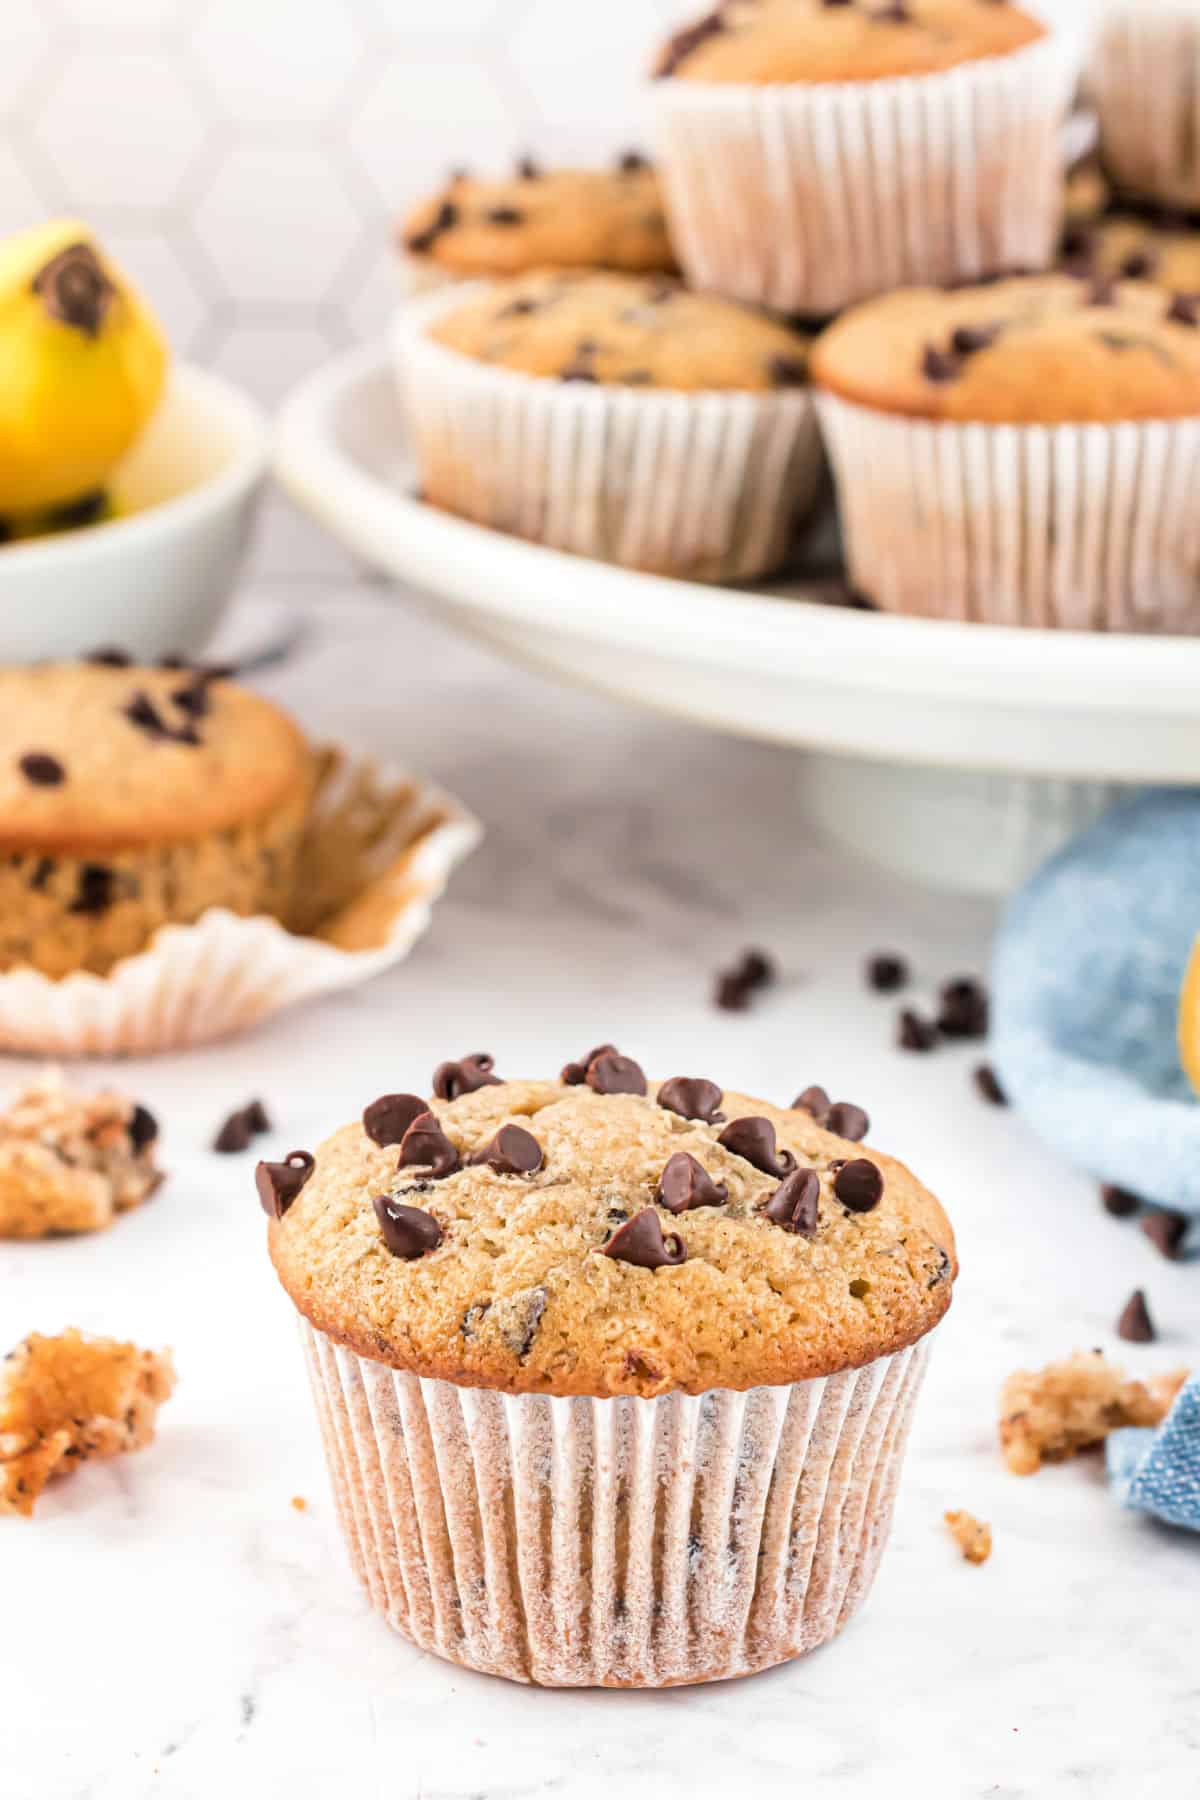 Banana muffin with mini chocolate chips on counter.